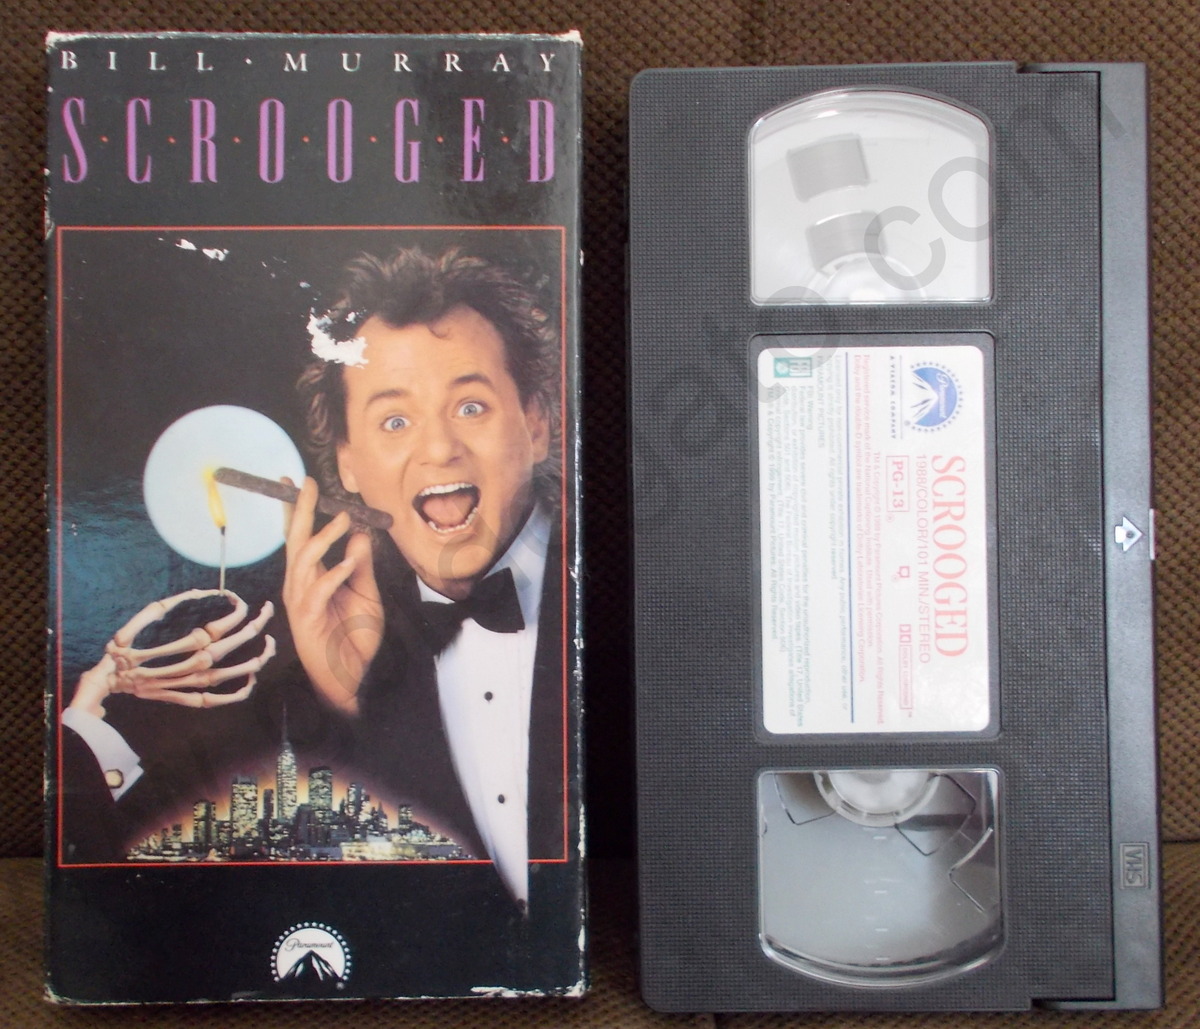 Scrooged (VHS, 2002)